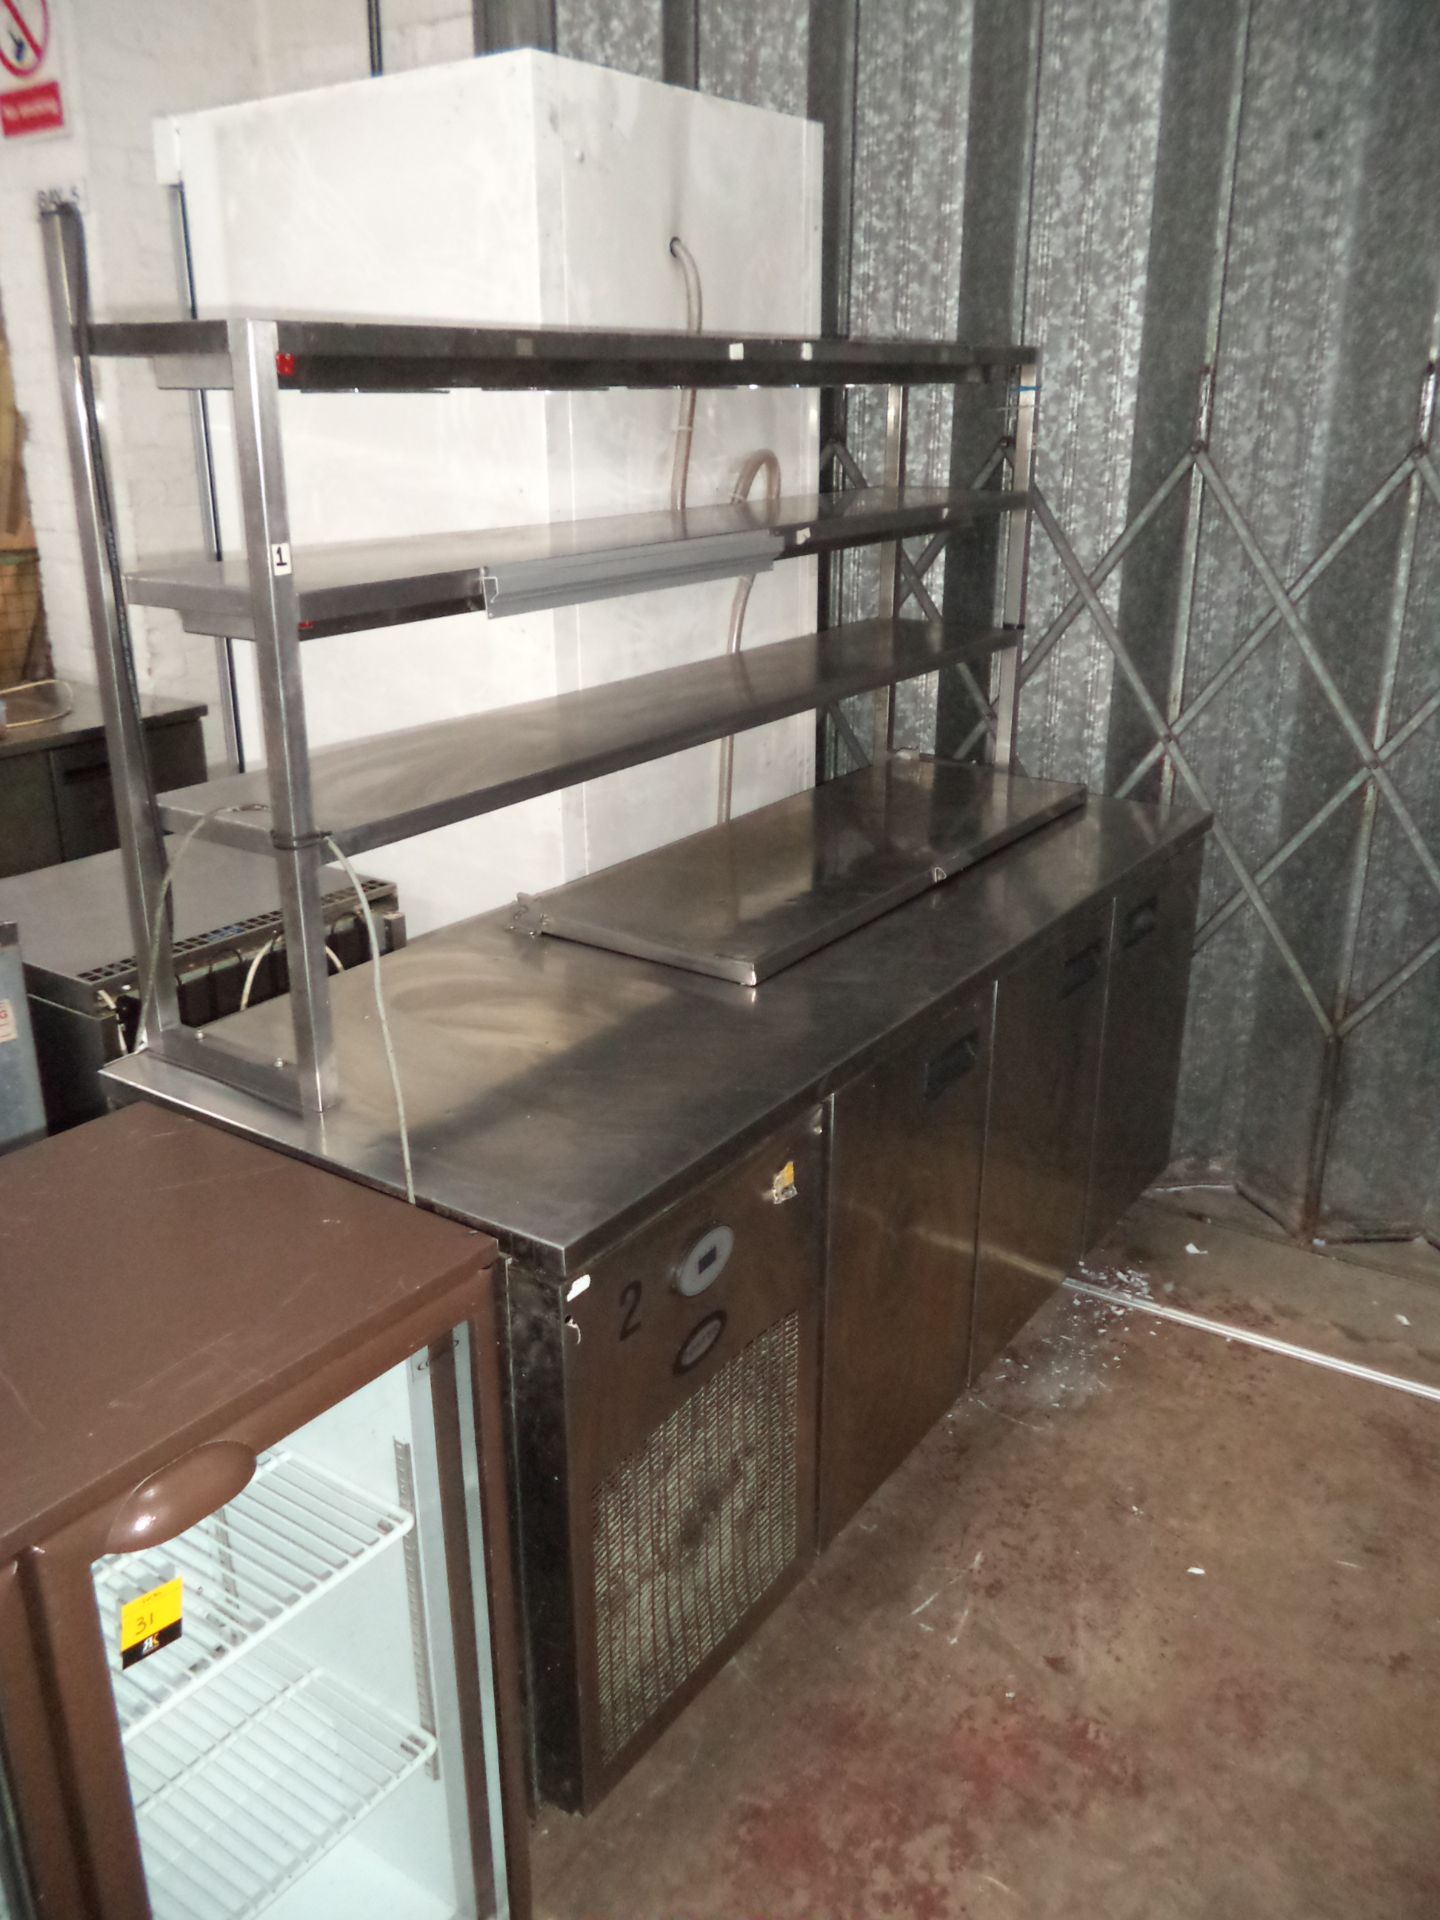 Foster stainless steel large refrigerated prep cabinet with triple doors including triple level